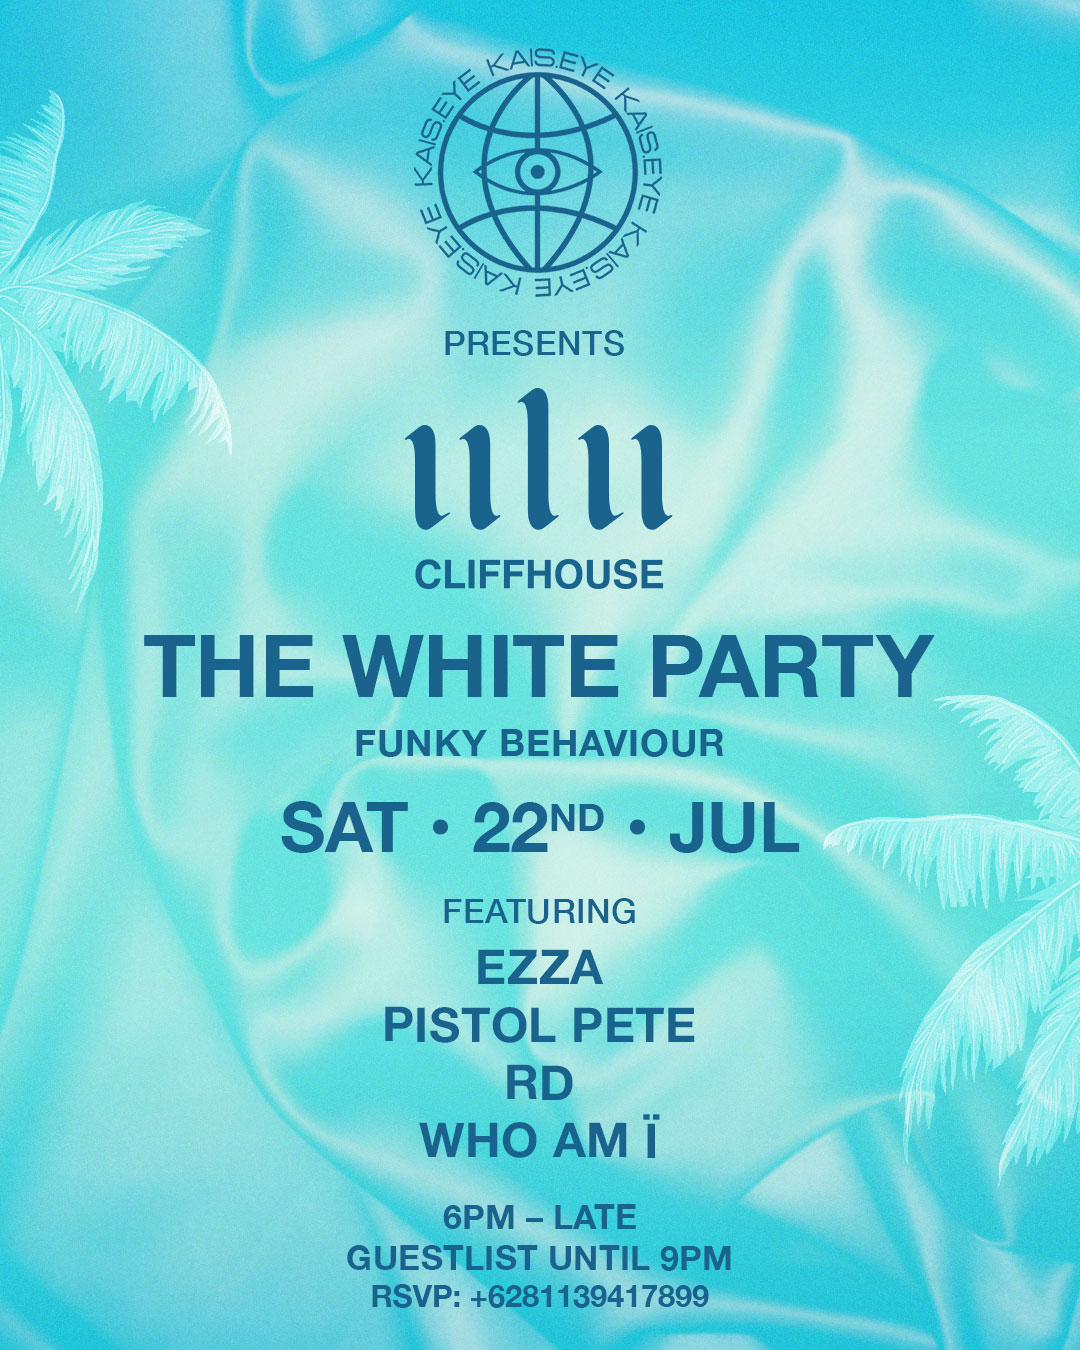 ULU CLIFFHOUSE X KAIS EYE PRESENT THE WHITE PARTY – SATURDAY JULY 22ND thumbnail image